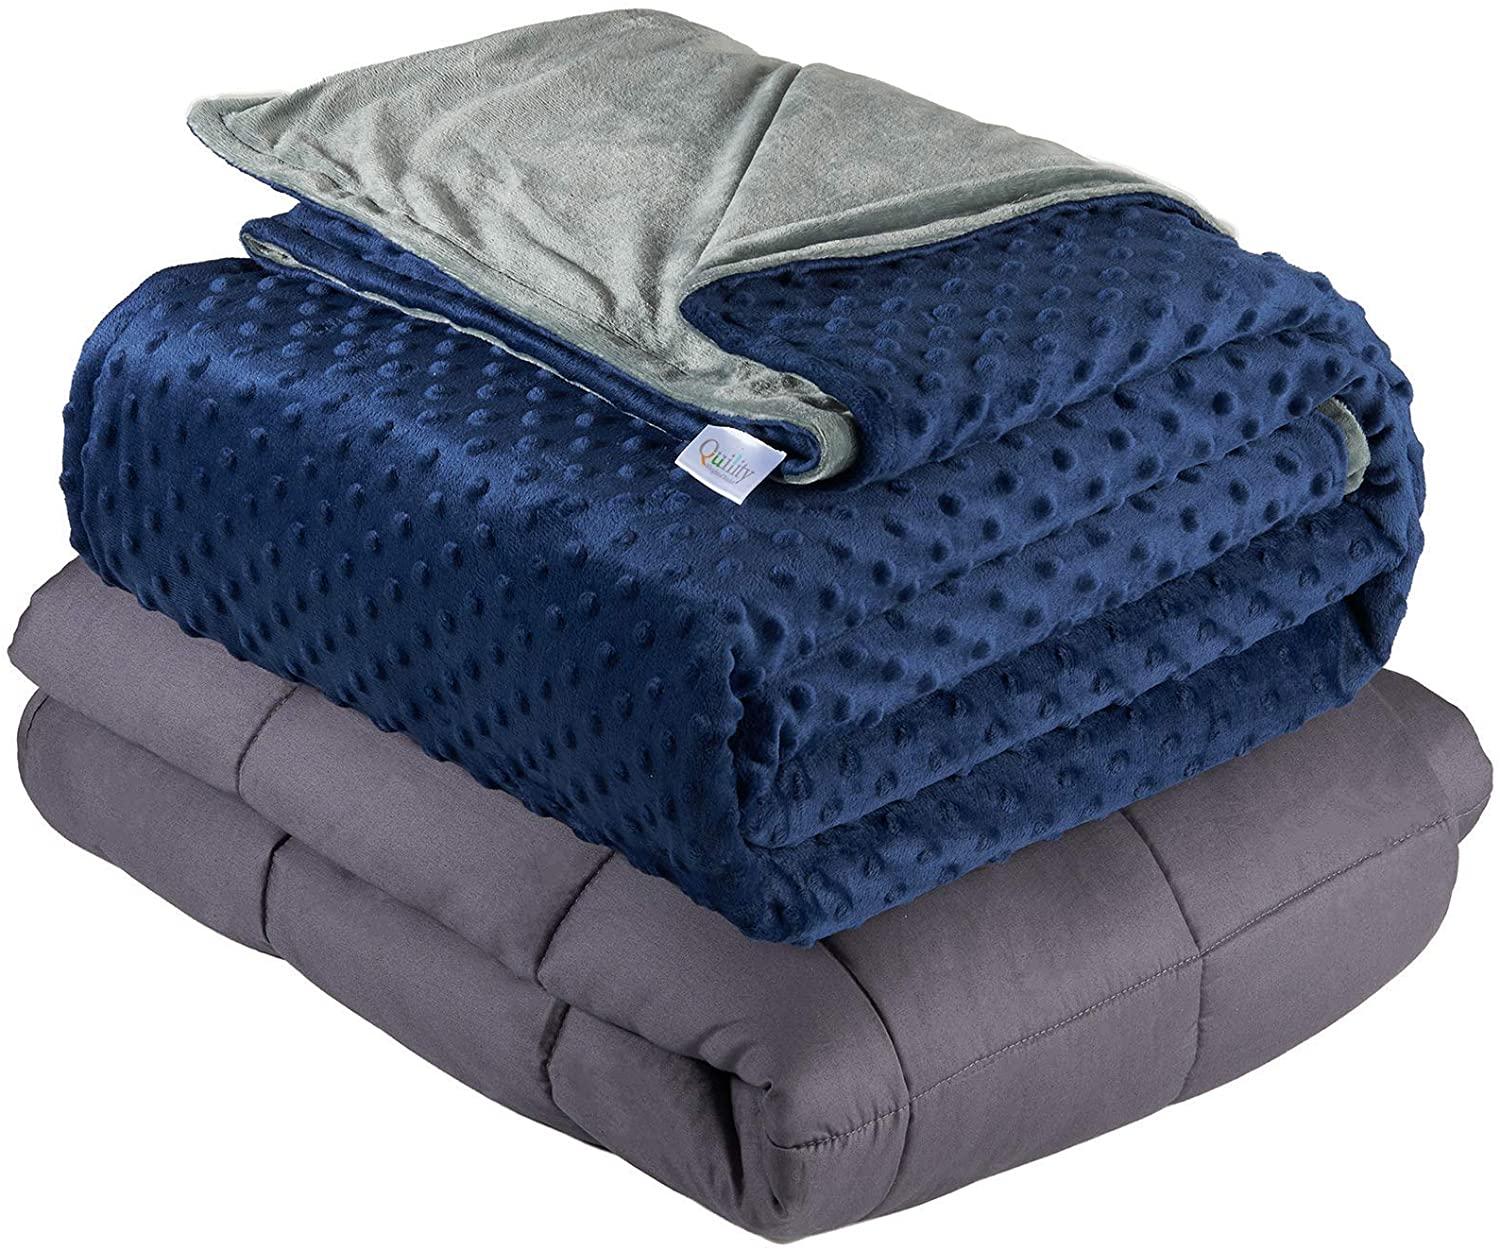 Quility Weighted Blanket for Adults for $57.59 Shipped